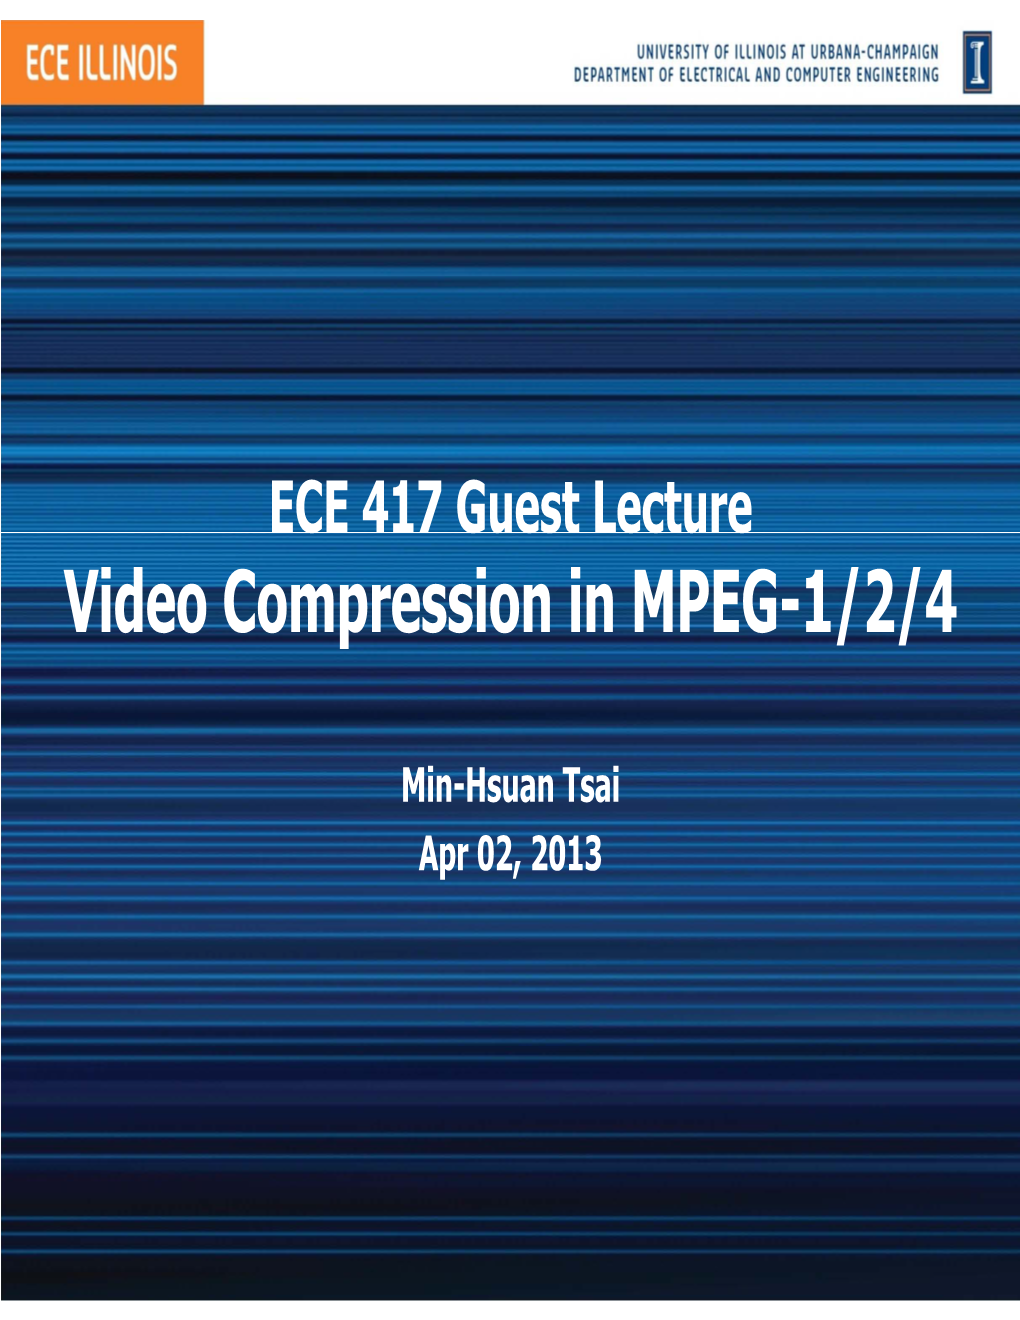 Video Compression in MPEG-1/2/4